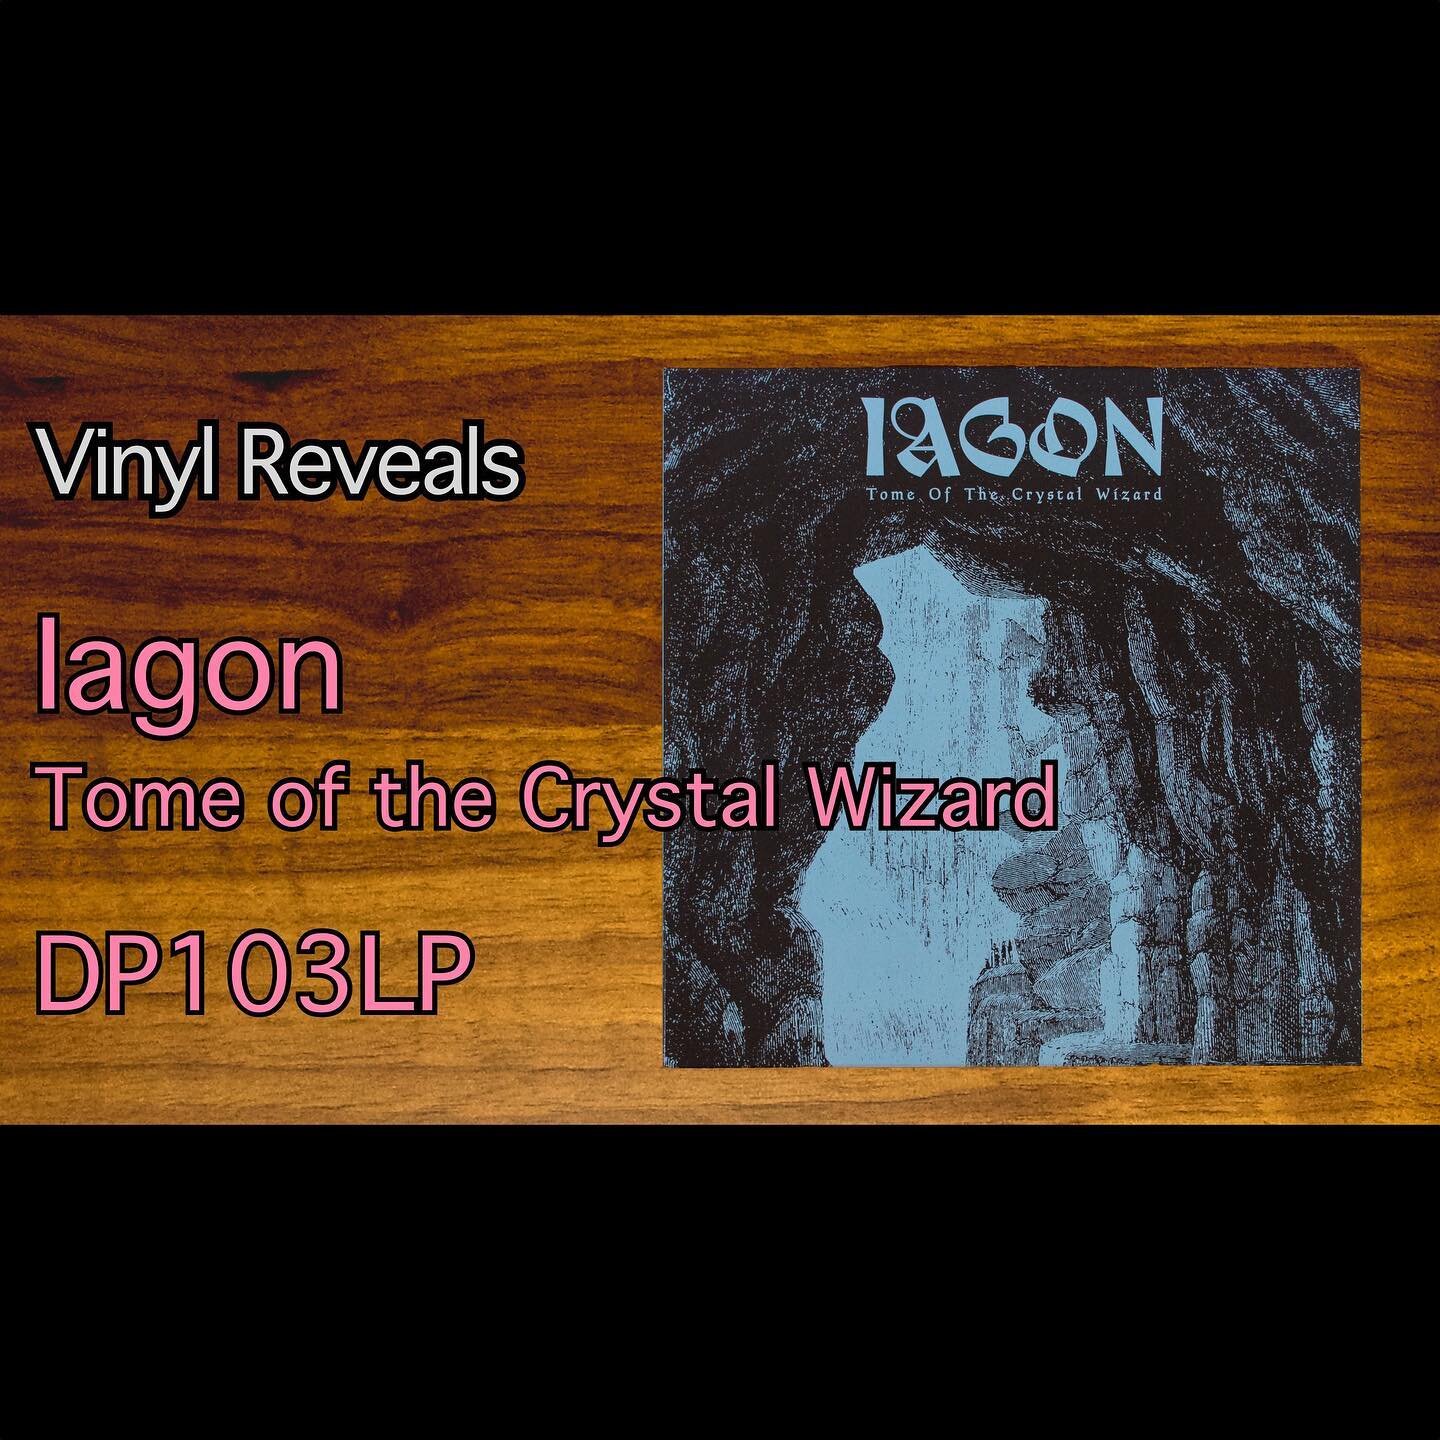 Today we are looking at Tome of the Crystal Wizard by Iagon. Video is now live on the Vinyl Reveals YouTube channel. Link in profile.

#vinylReveal #vinyl #vinylcollection #vinylrecords #records #vinylReveals #vinylcommunity @dunkelheitprod #Iagon #d